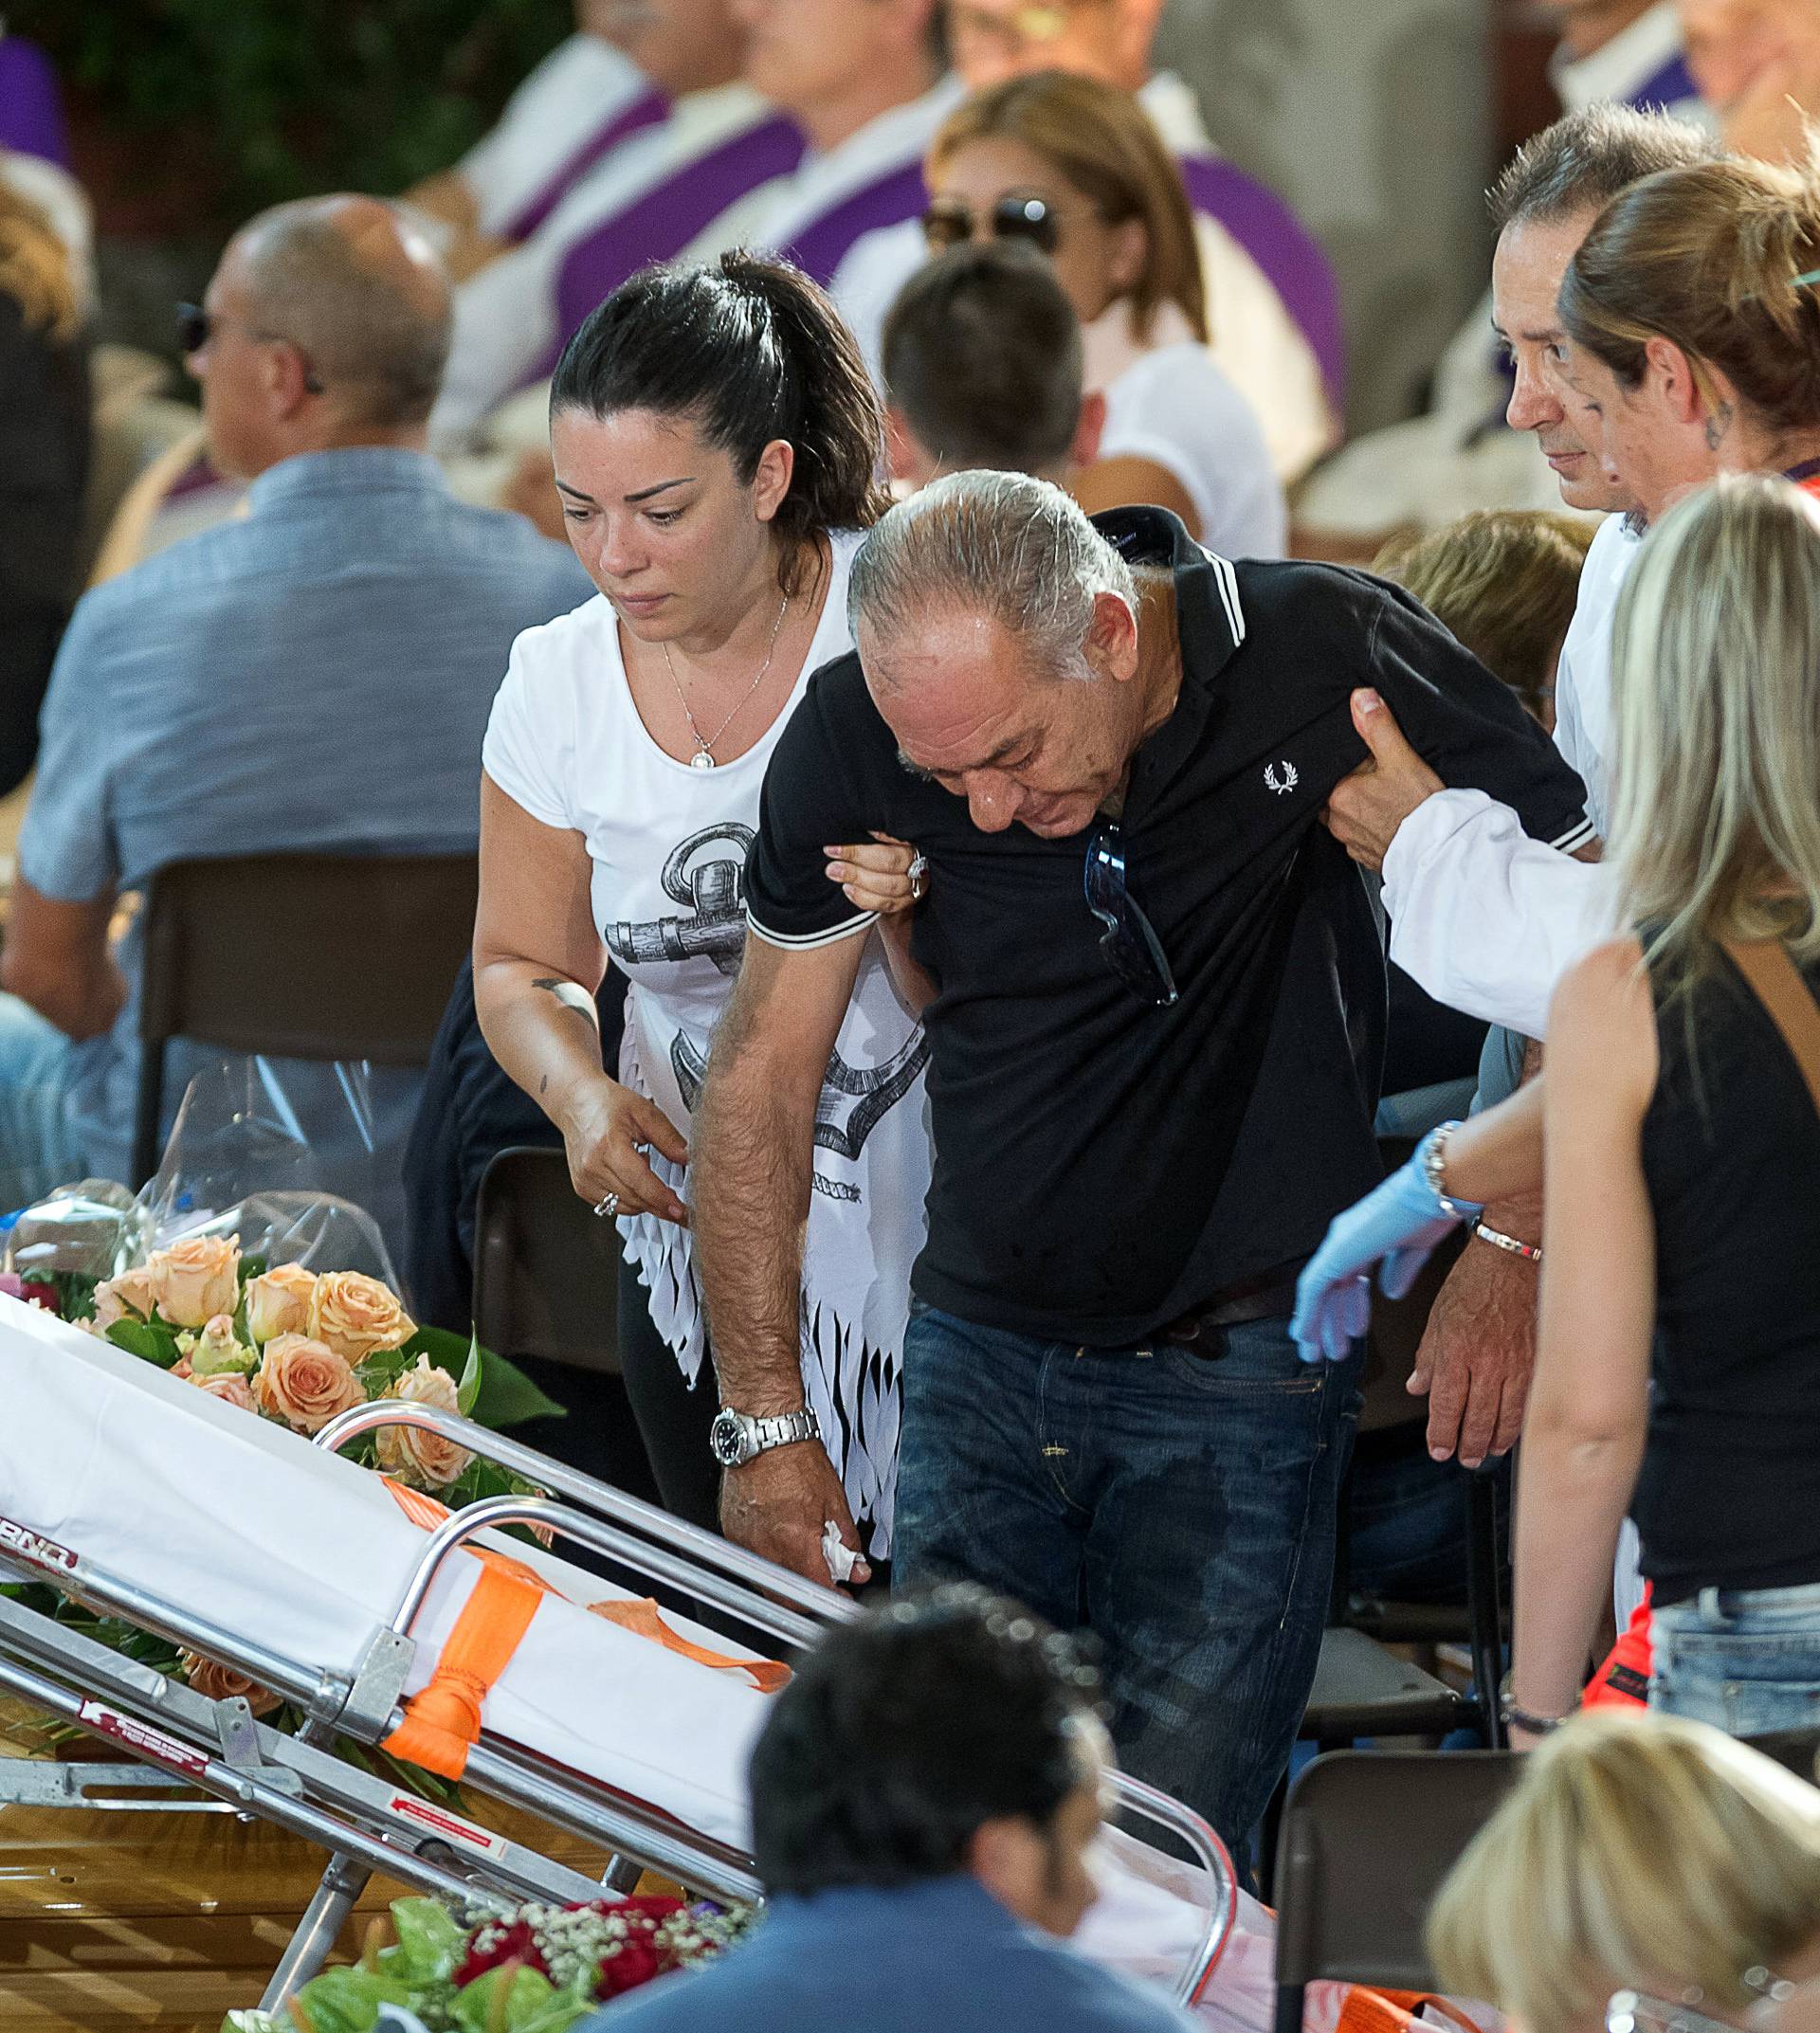 A man is helped by Red Cross members during a funeral service for victims of the earthquake inside a gym in Ascoli Piceno, Italy